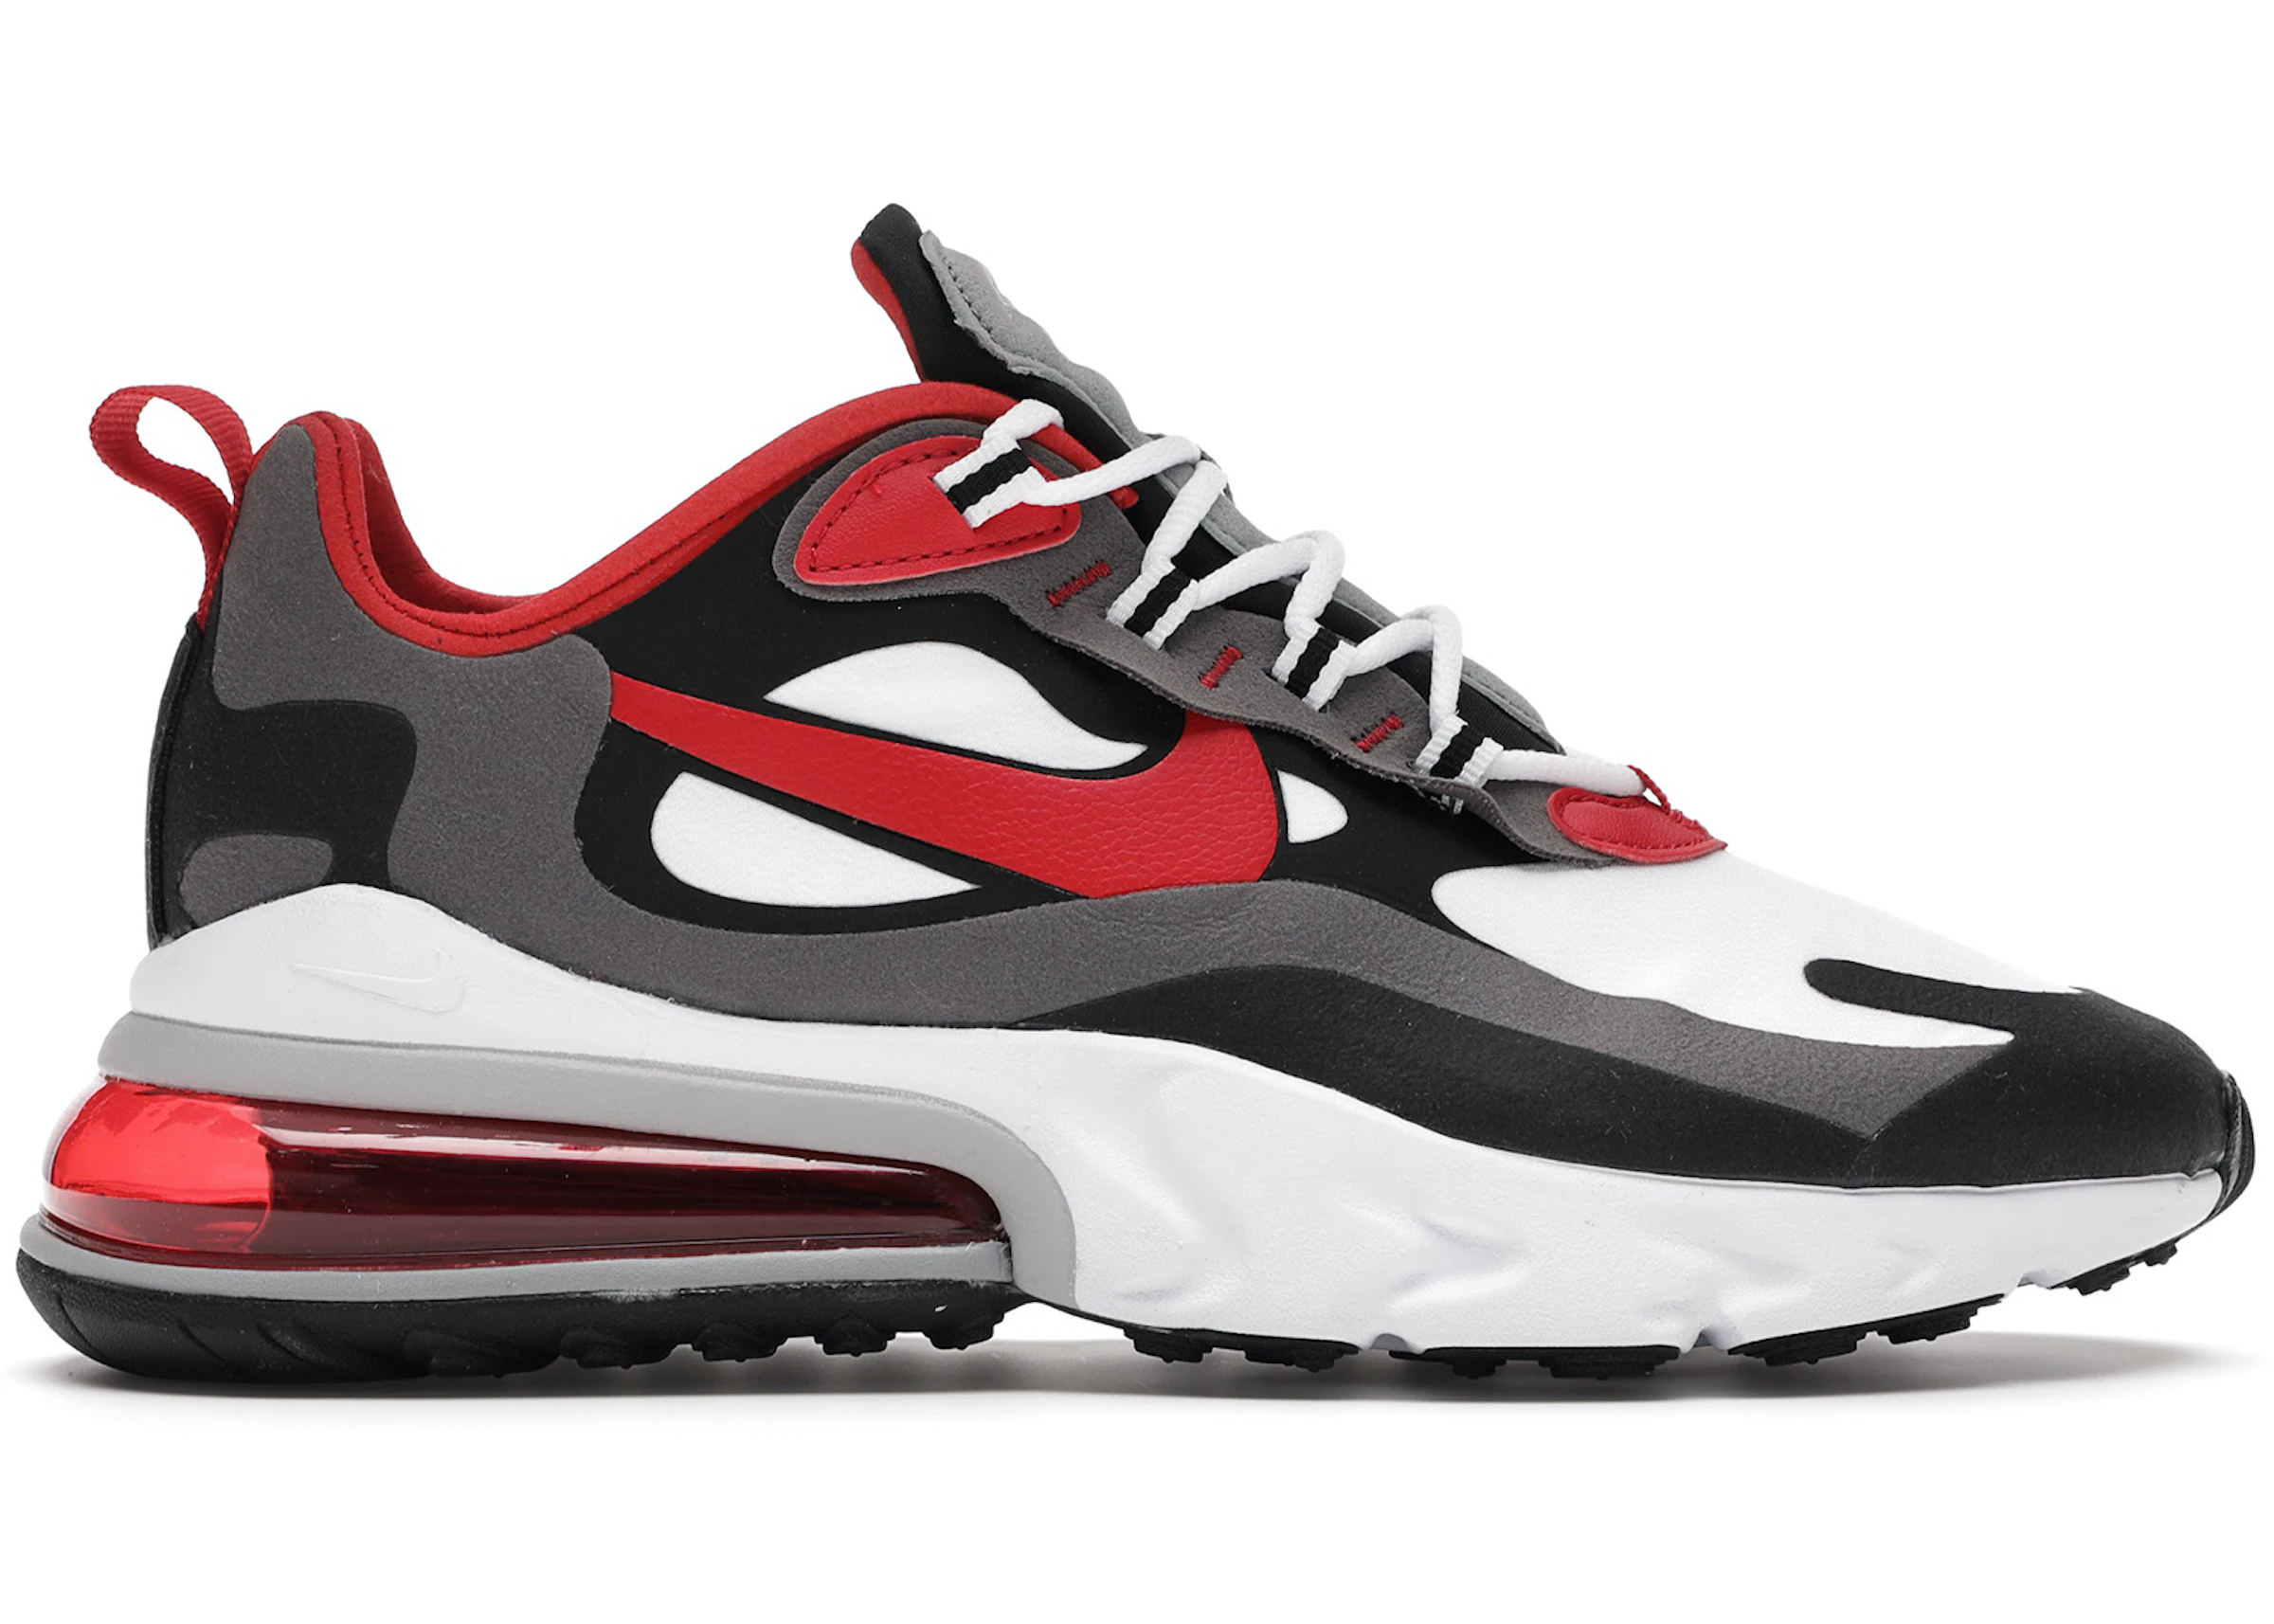 Buy red nike 270 Nike Air Max 270 Shoes & New Sneakers - StockX